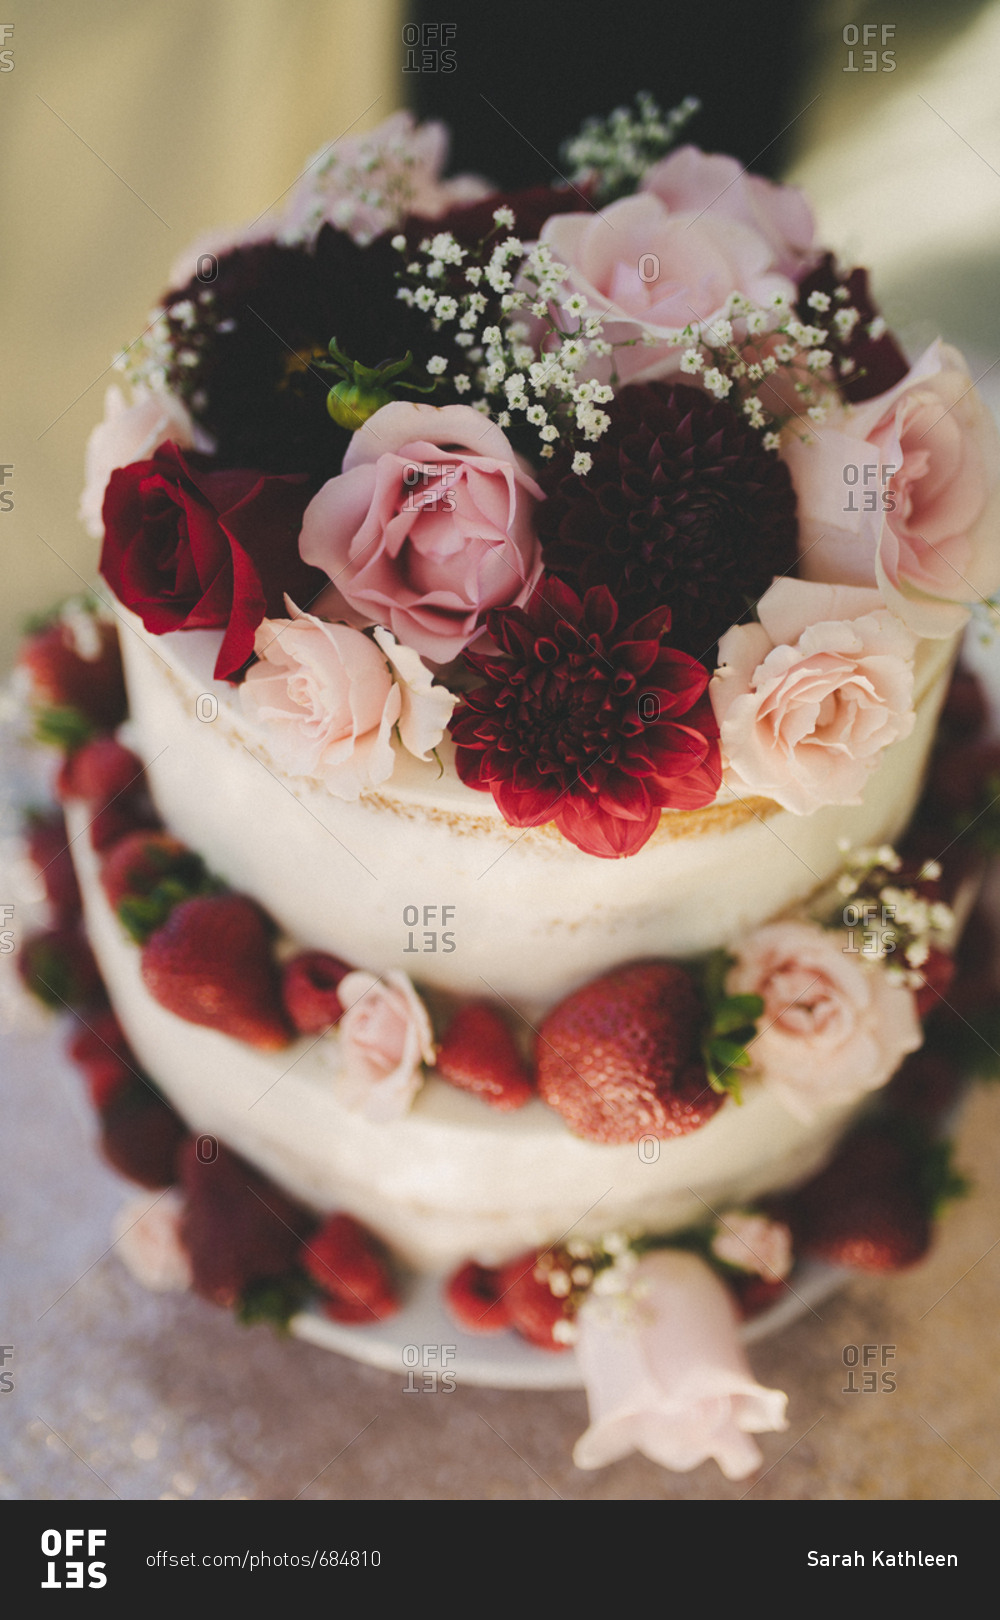 High angle close-up top tier view of floral decorated wedding cake